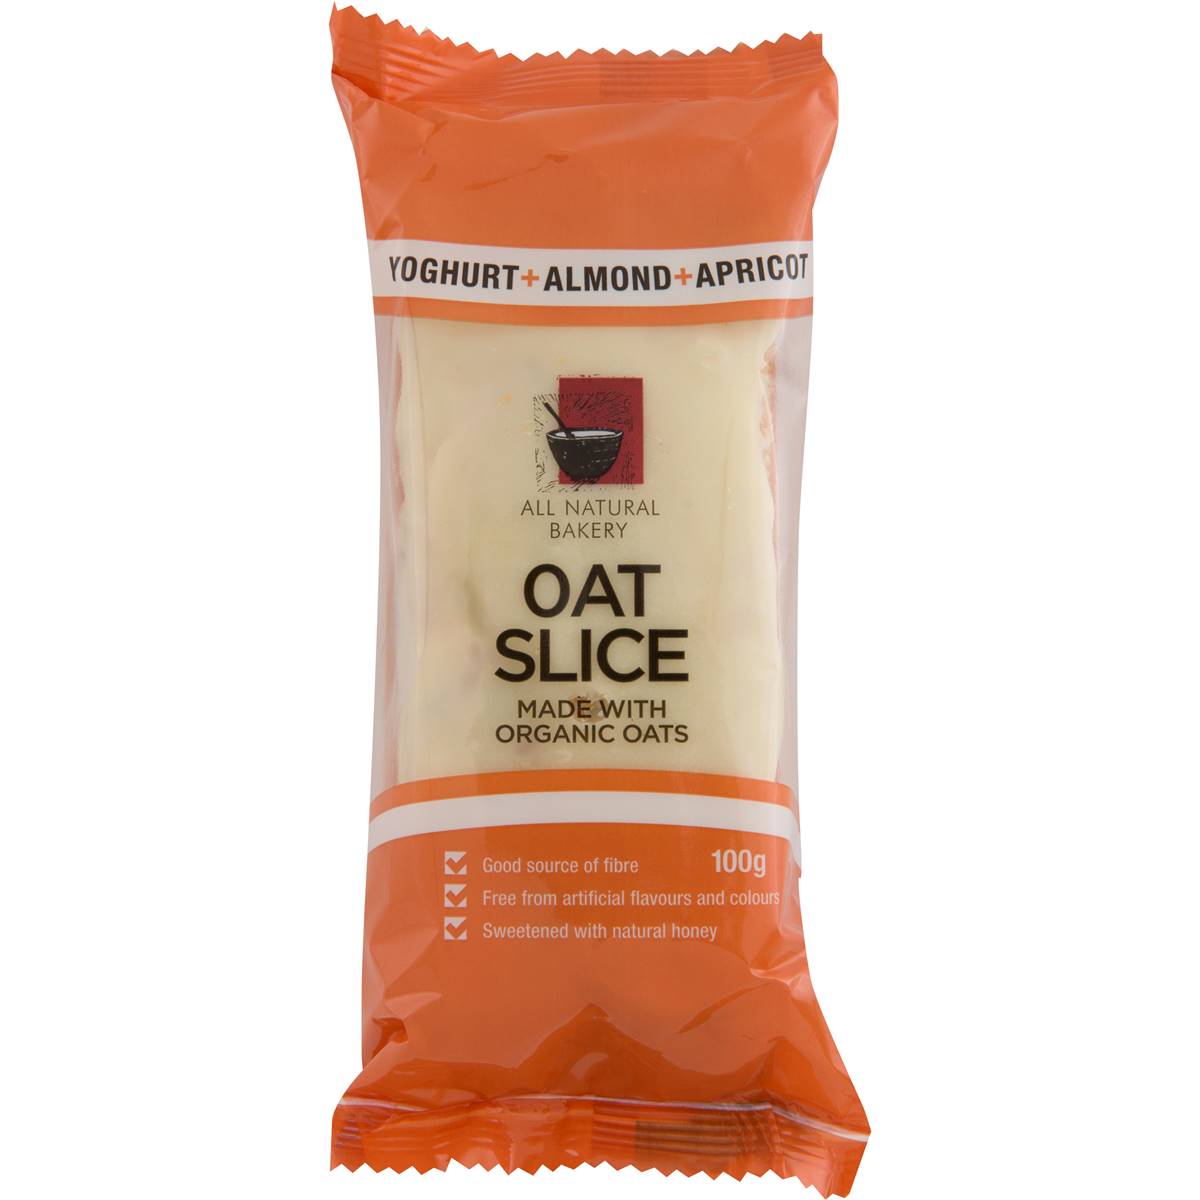 Calories in All Natural Bakery Bars Oat Slice Yog Almond & Apricot